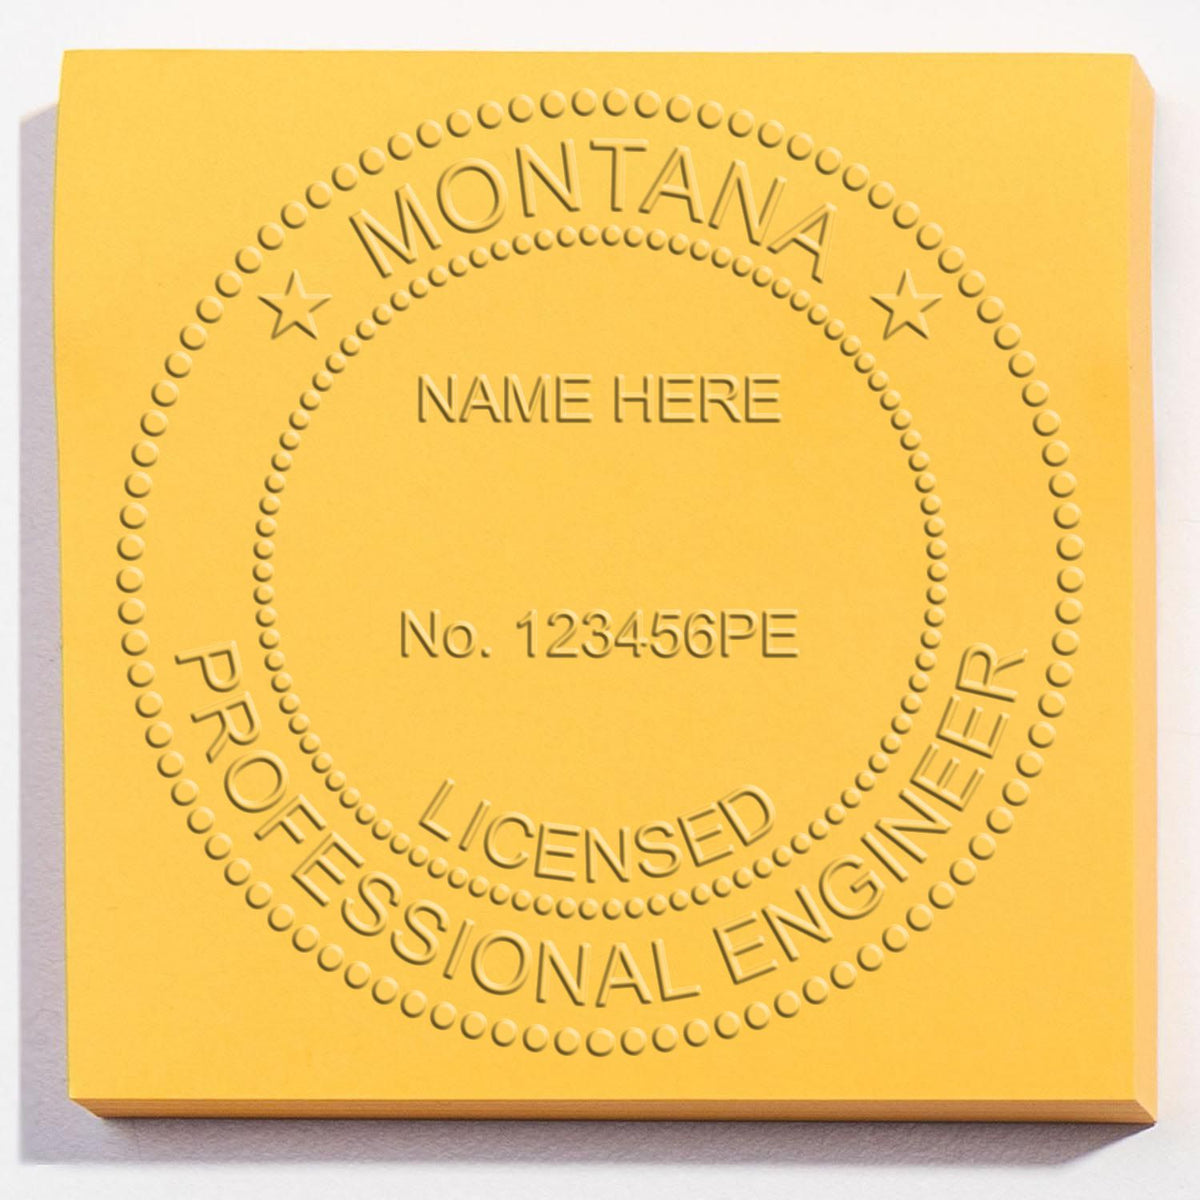 A stamped impression of the Soft Montana Professional Engineer Seal in this stylish lifestyle photo, setting the tone for a unique and personalized product.